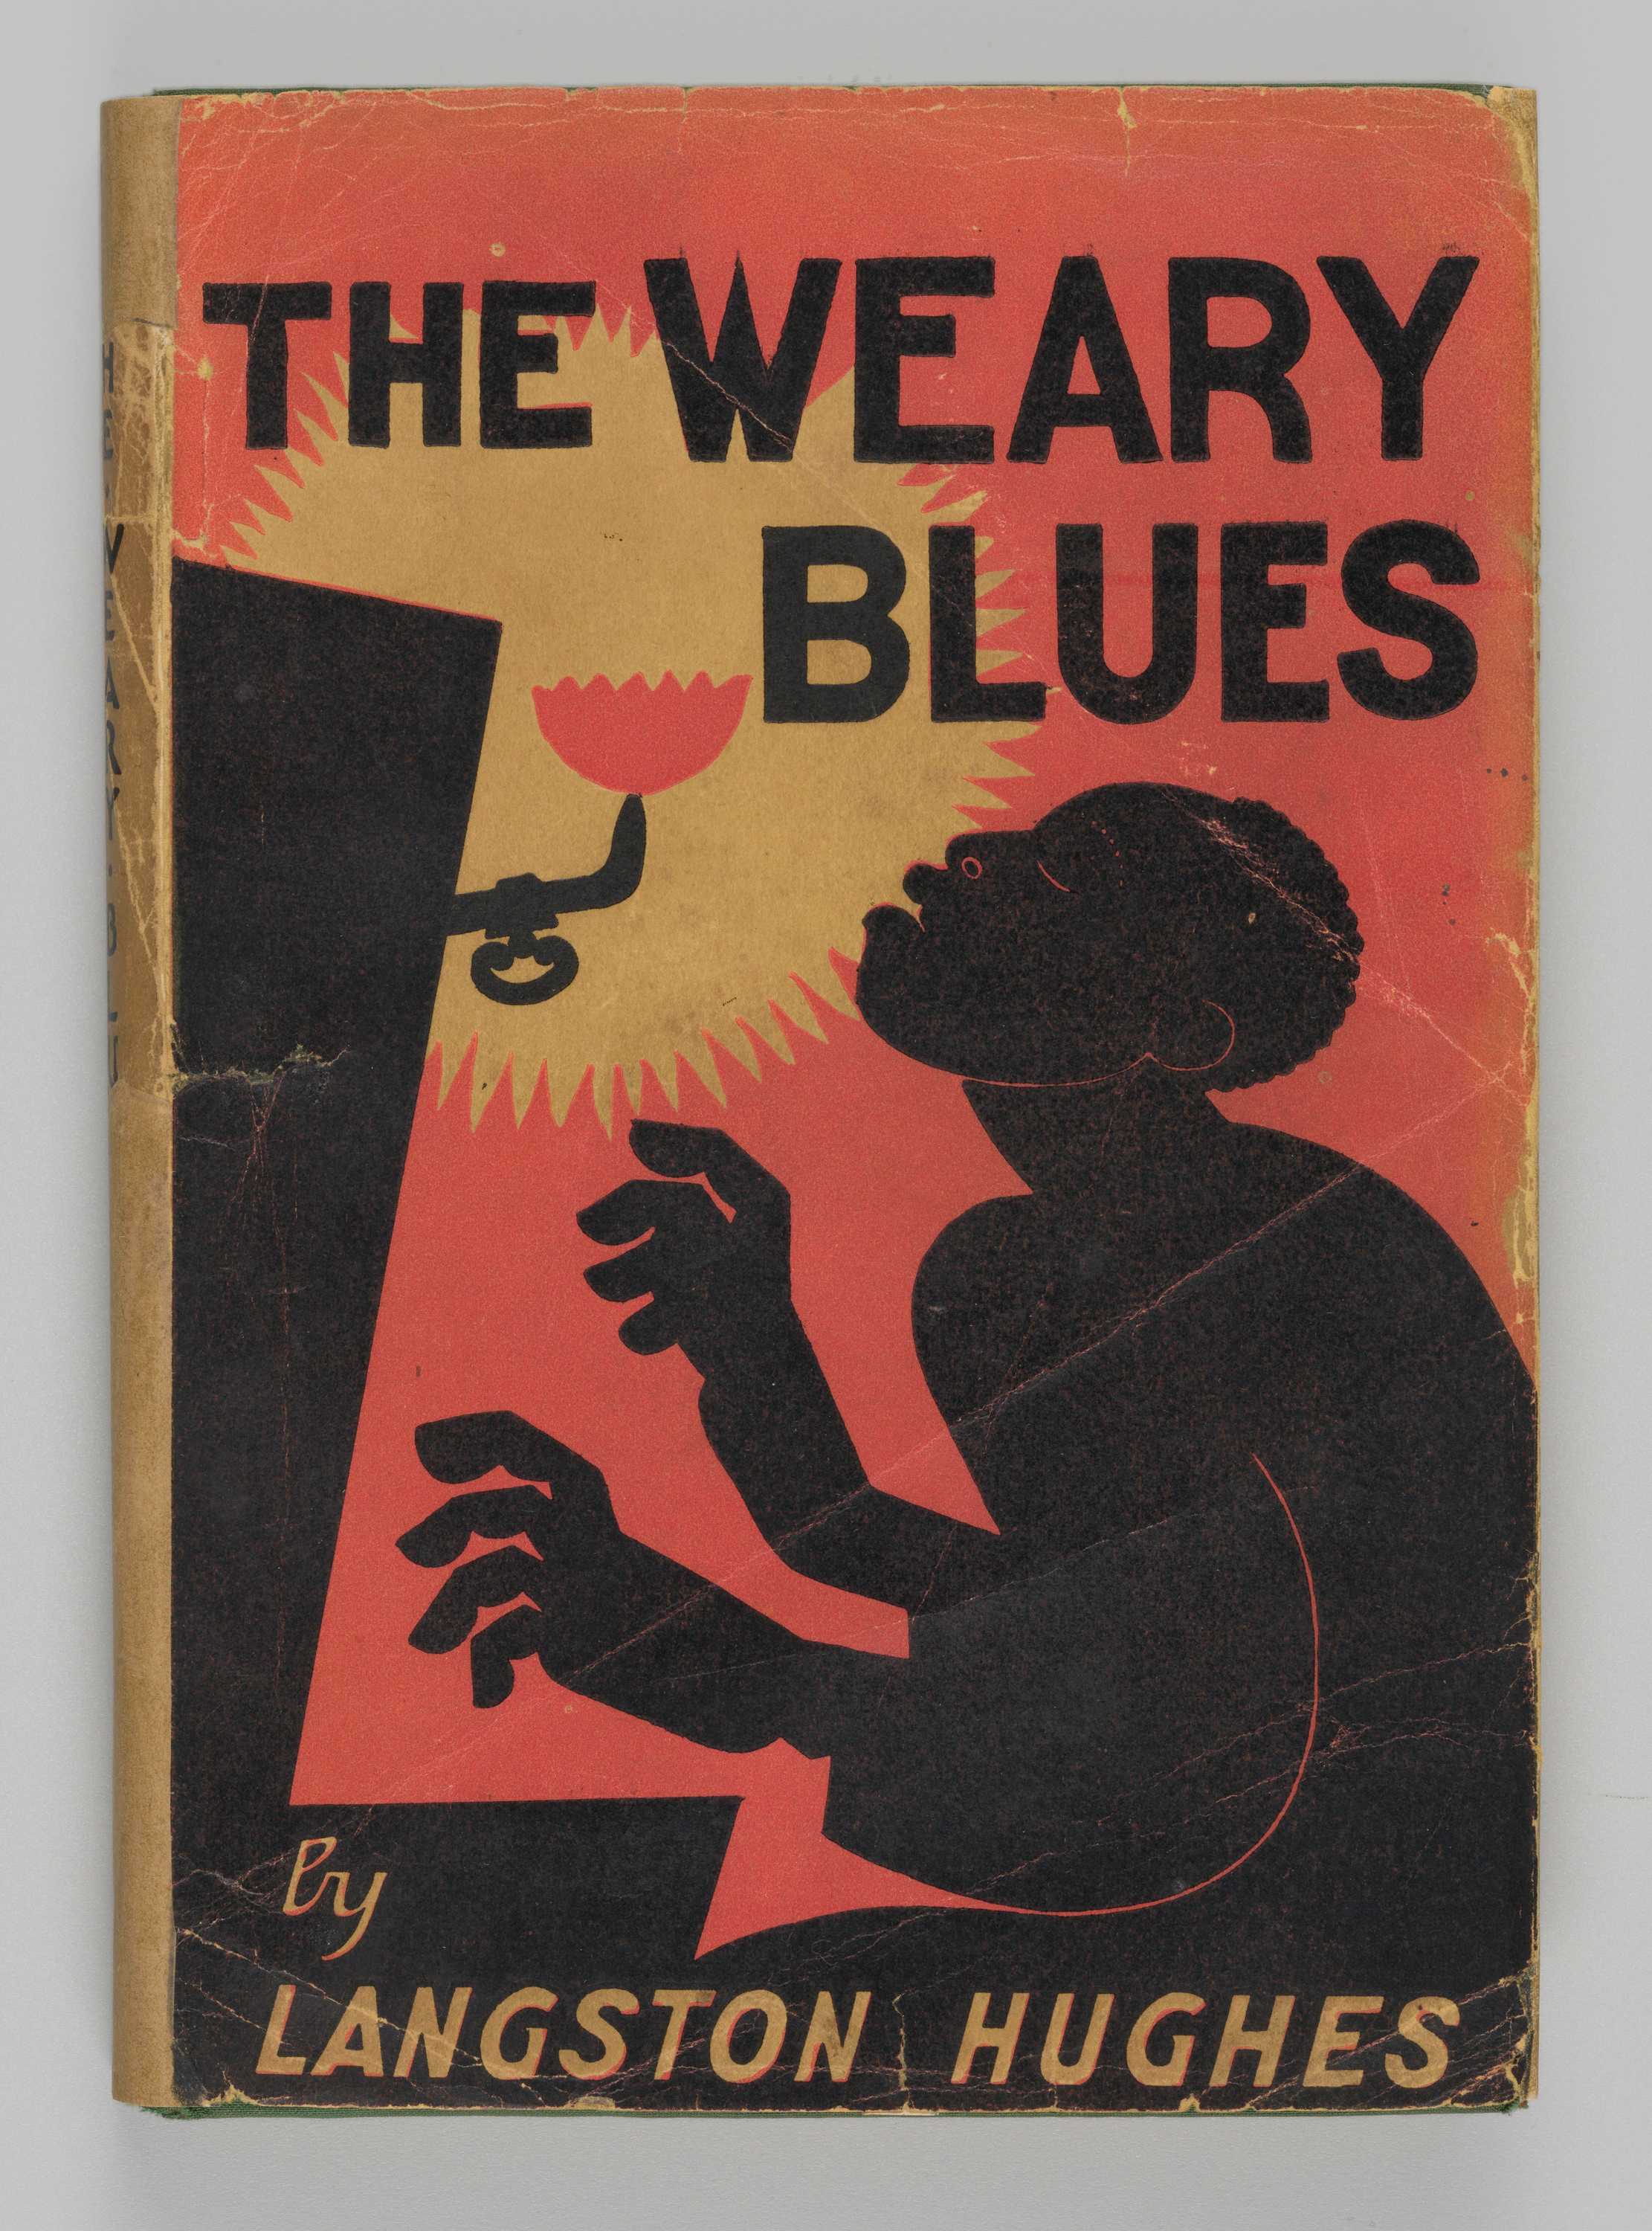 Image of the book cover of The Weary Blues by Langston Hughes.